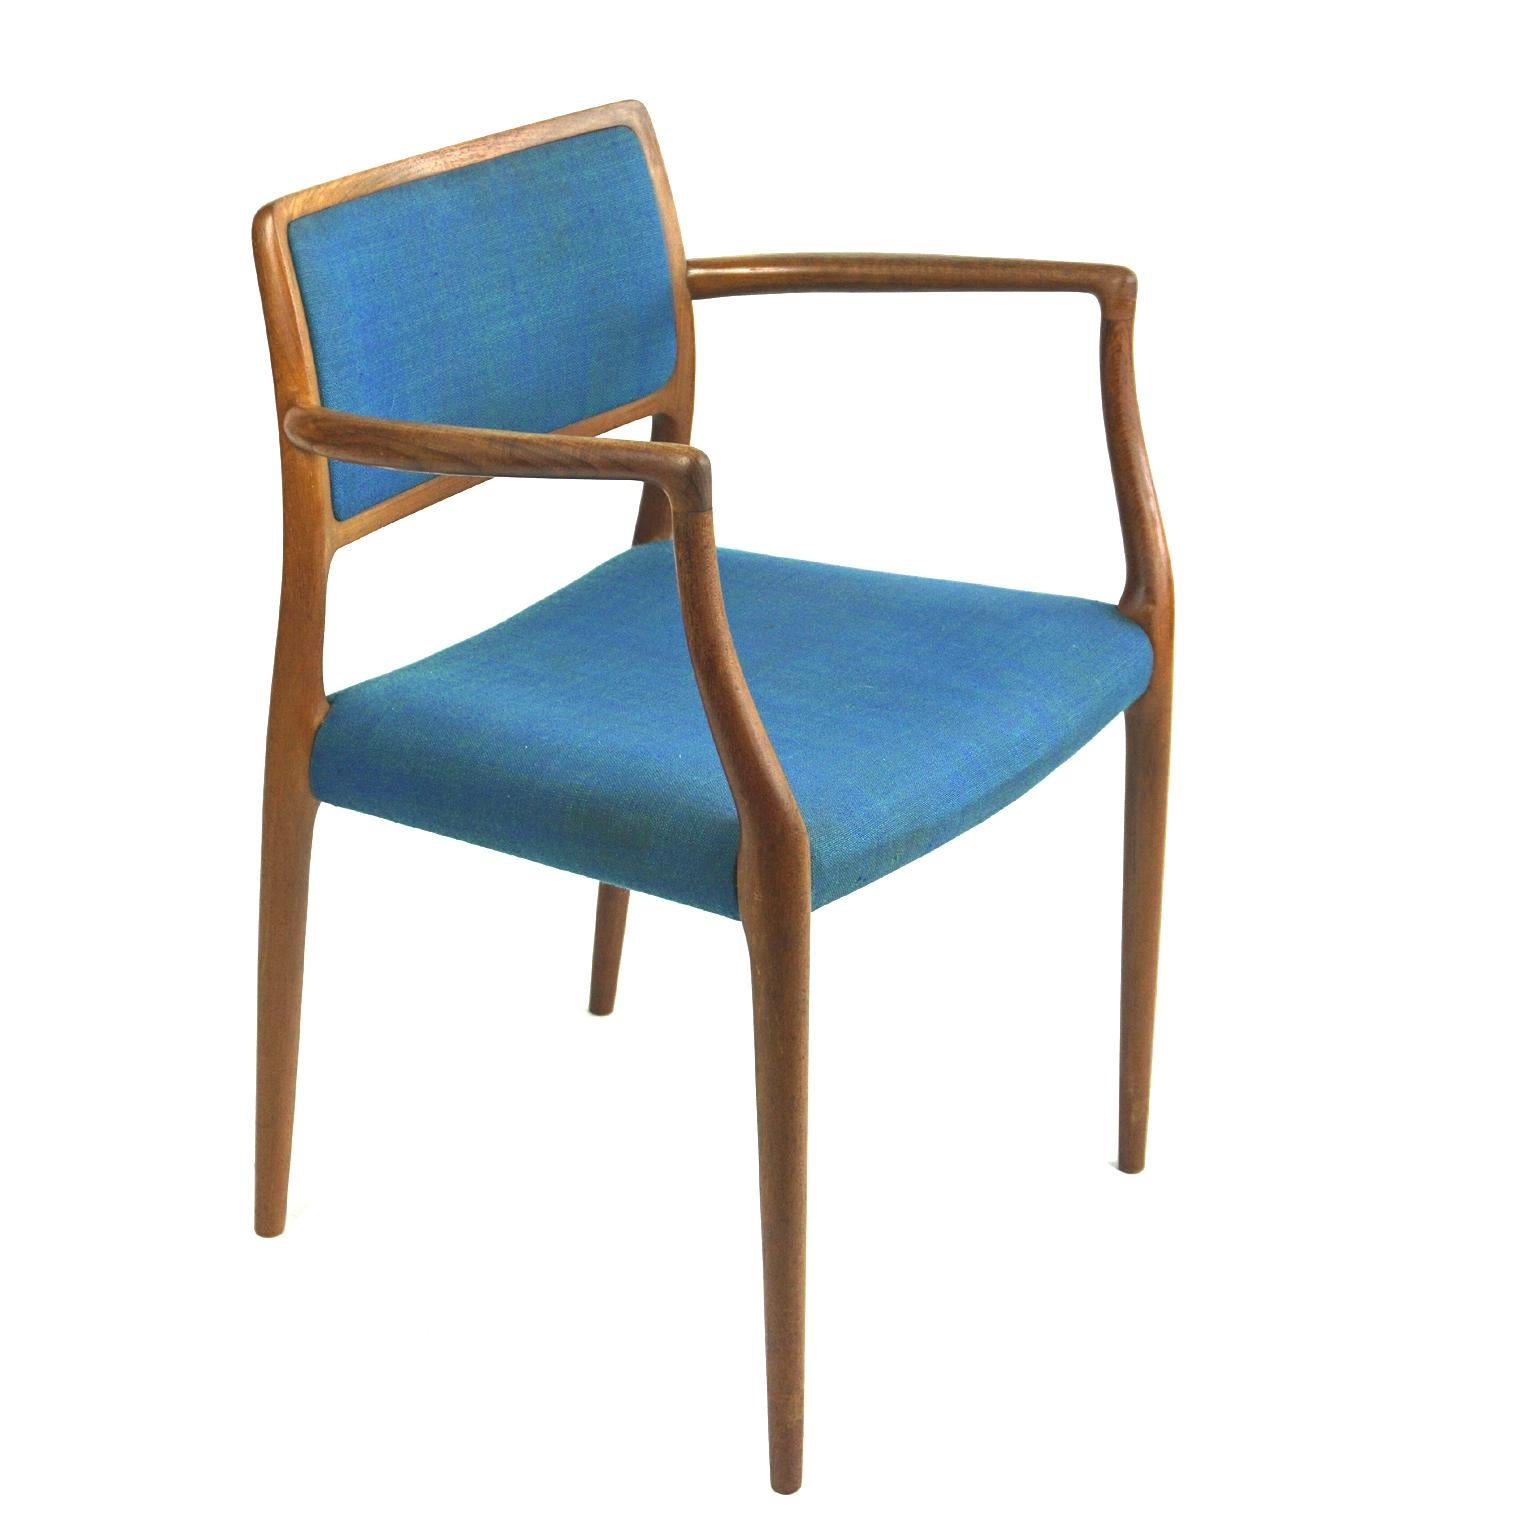 Scandinavian Modern Mod. 65 teak dining armchair designed by Niels Otto Moller for his own company: J.L. Moller Mobelfabrik in Denmark, in the 1960s.
The Hand-shaped solid teak frame exemplifies Møller’s signature sculptural approach. Very